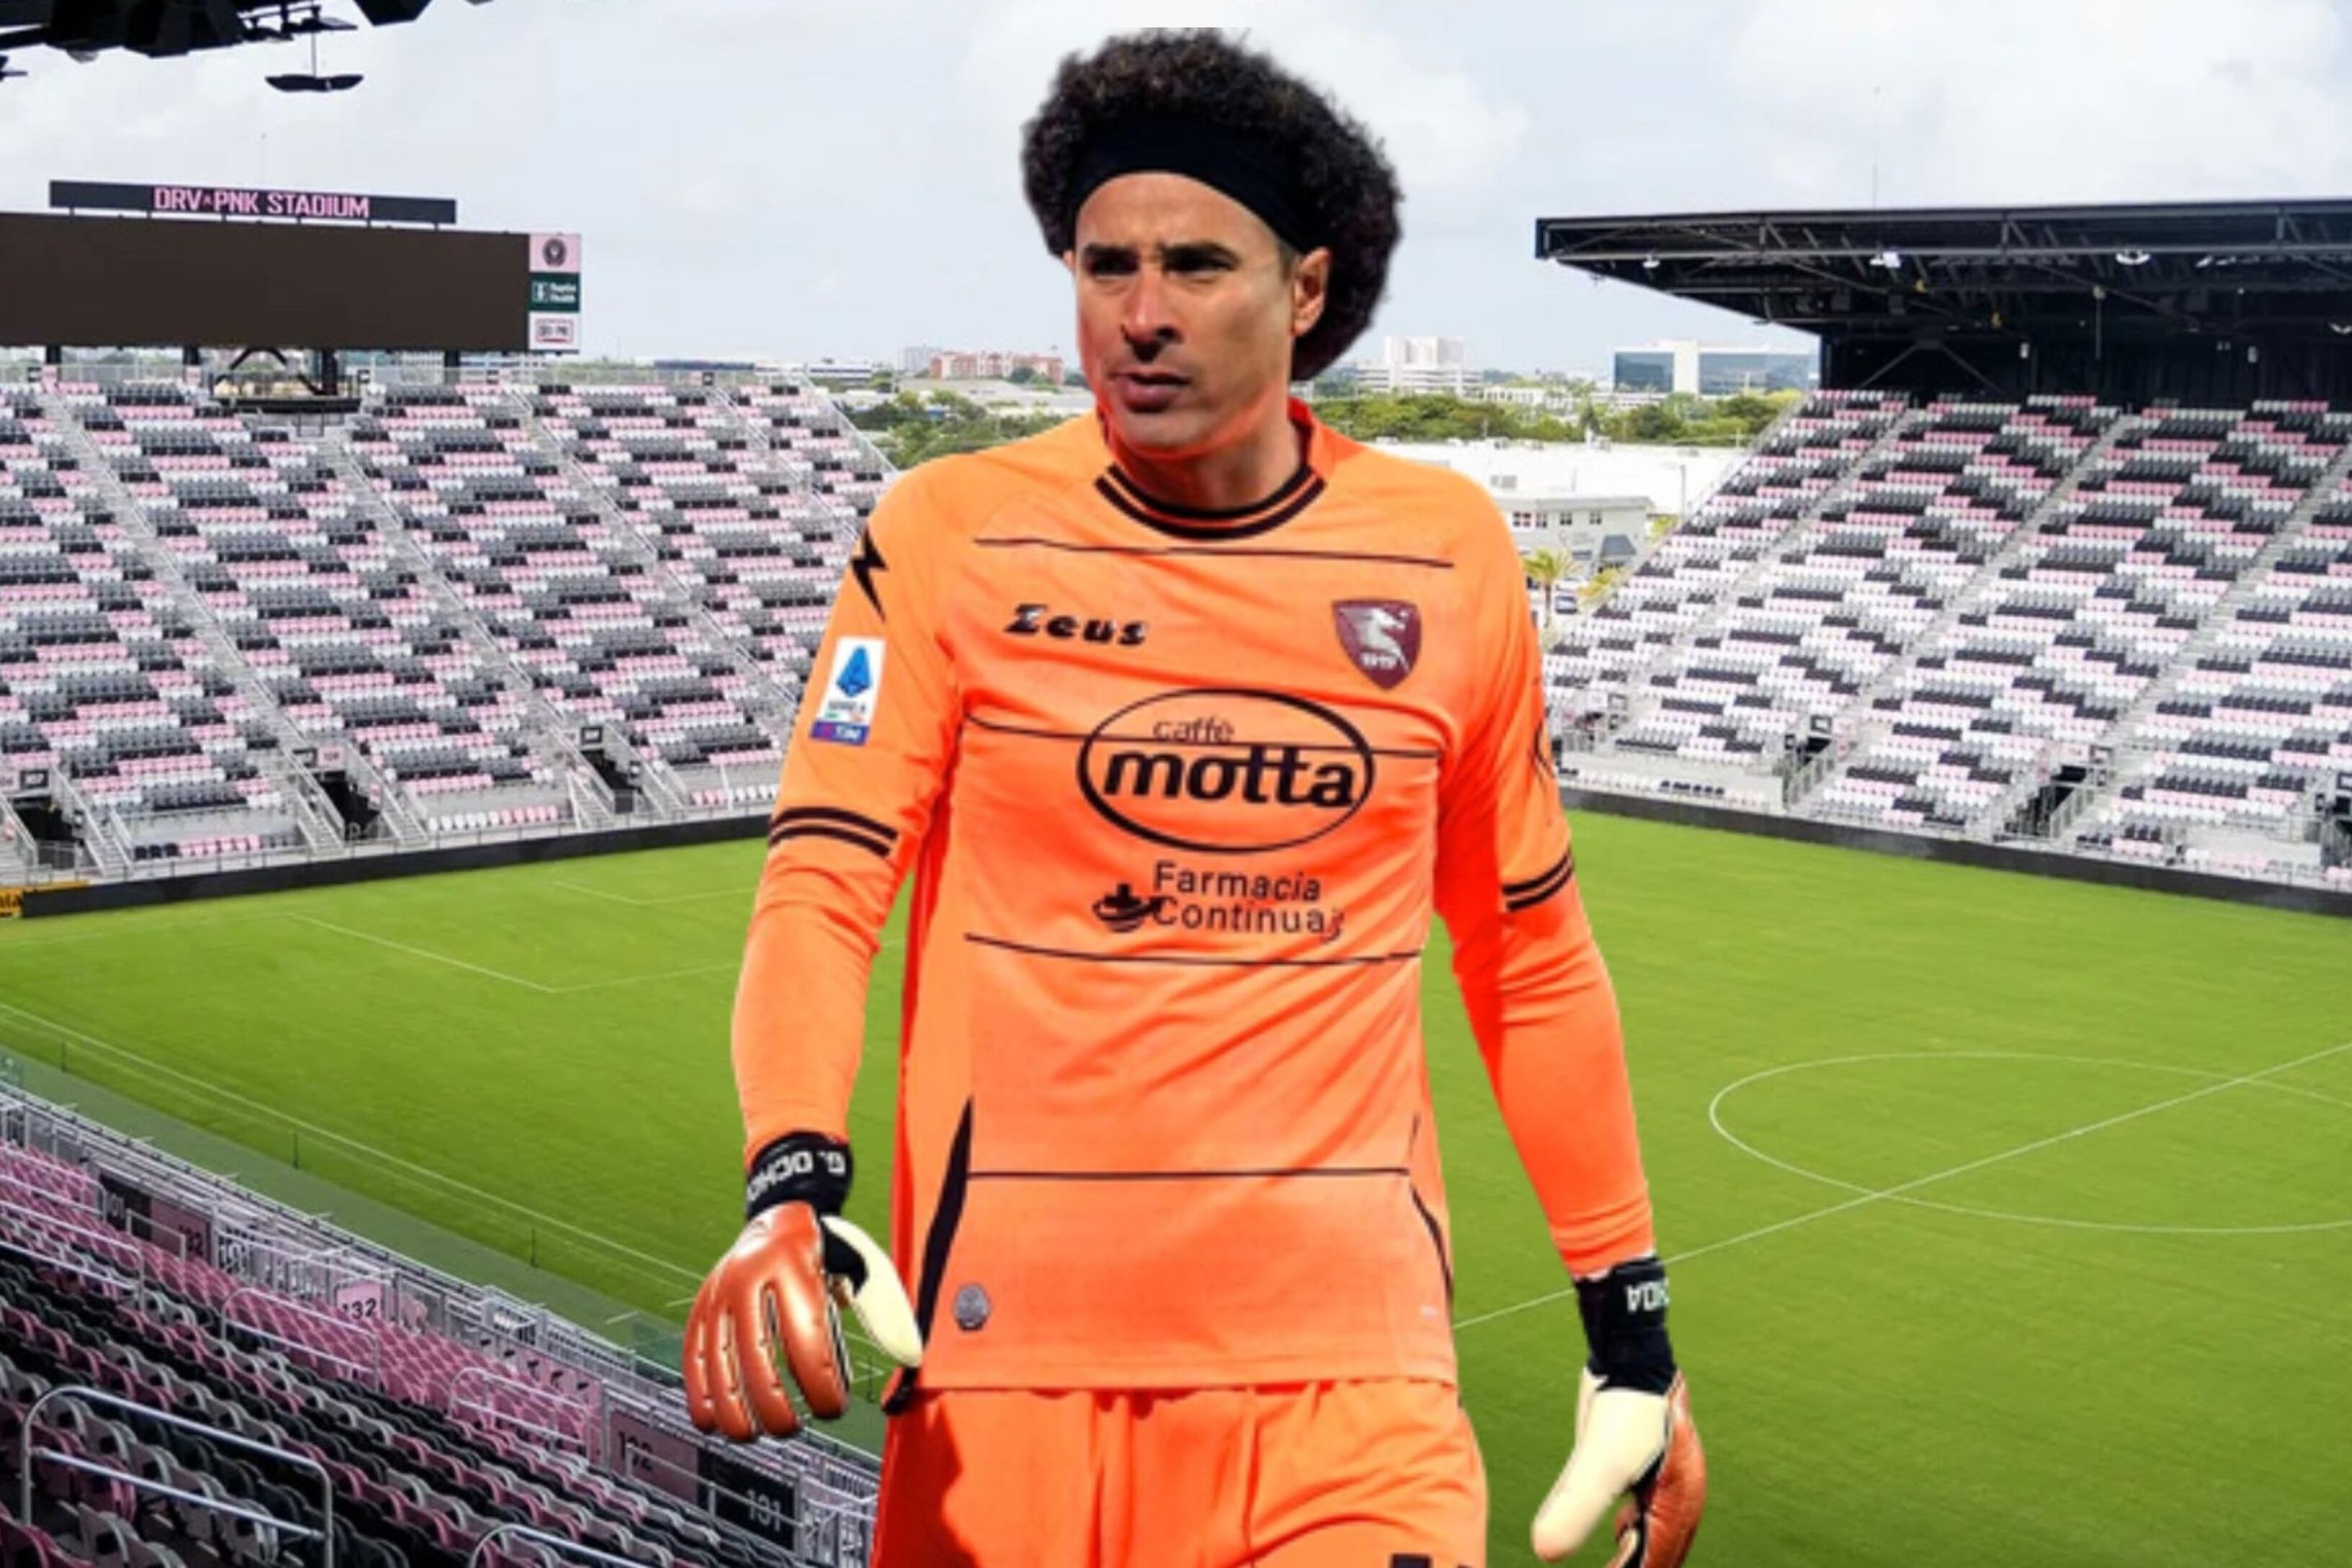 While Ochoa earns 2.5 million euros at Salernitana, the salary he would have in MLS